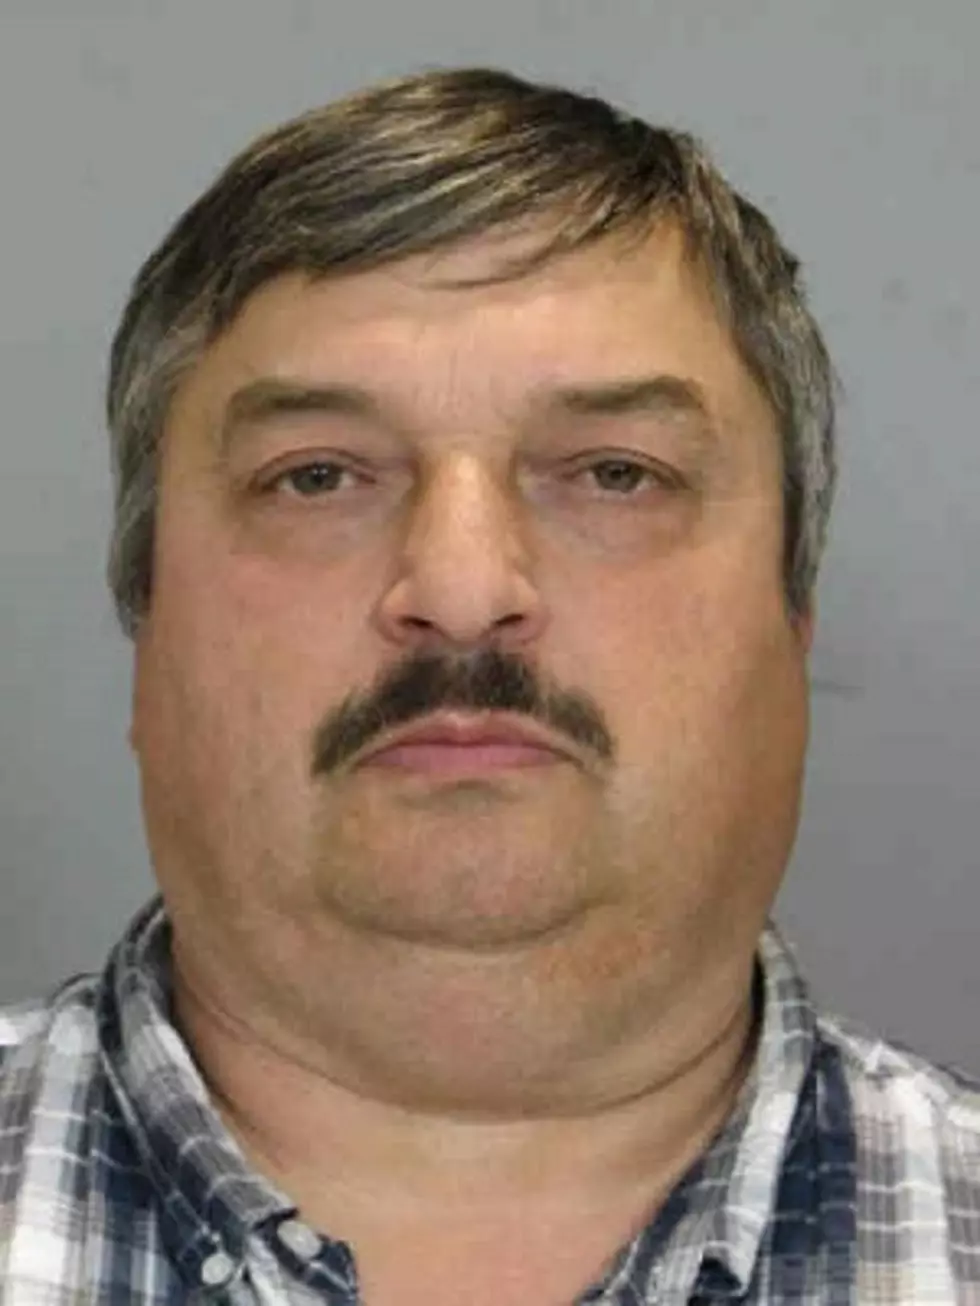 Former Dunkerton Police Chief Charged